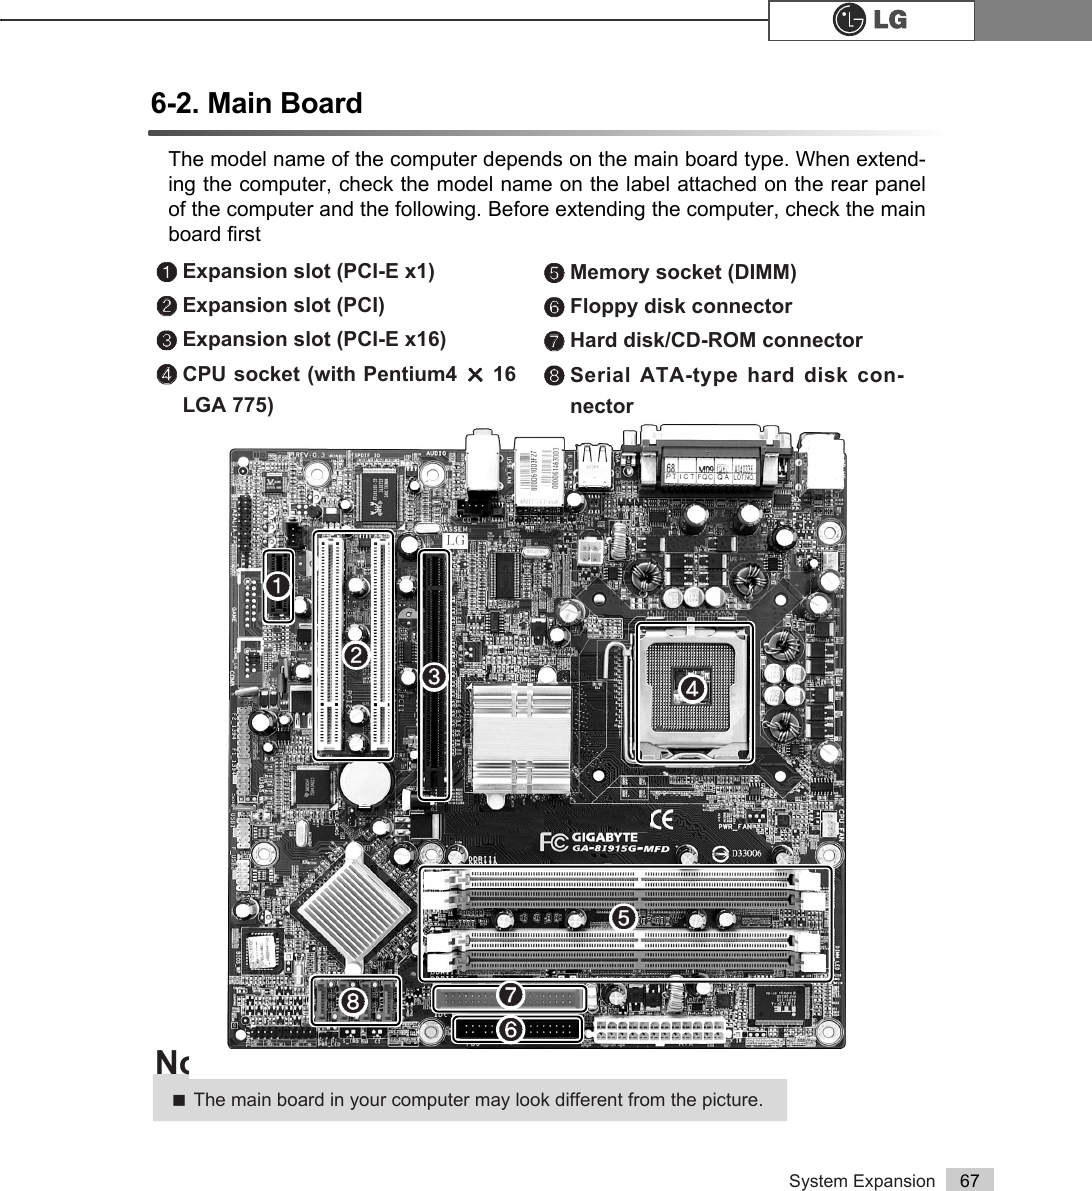 System Expansion 676-2. Main Board The model name of the computer depends on the main board type. When extend-ing the computer, check the model name on the label attached on the rear panelof the computer and the following. Before extending the computer, check the mainboard first℘Expansion slot (PCI-E x1)ℙℙExpansion slot (PCI) ℚExpansion slot (PCI-E x16)ℛℛCPU socket (with Pentium4 Á16LGA 775)ℜℜMemory socket (DIMM)ℝFloppy disk connector ℞℞Hard disk/CD-ROM connector℟Serial ATA-type hard disk con-nectorãThe main board in your computer may look different from the picture.Note℘ℙℚℛℜℝ℞℟